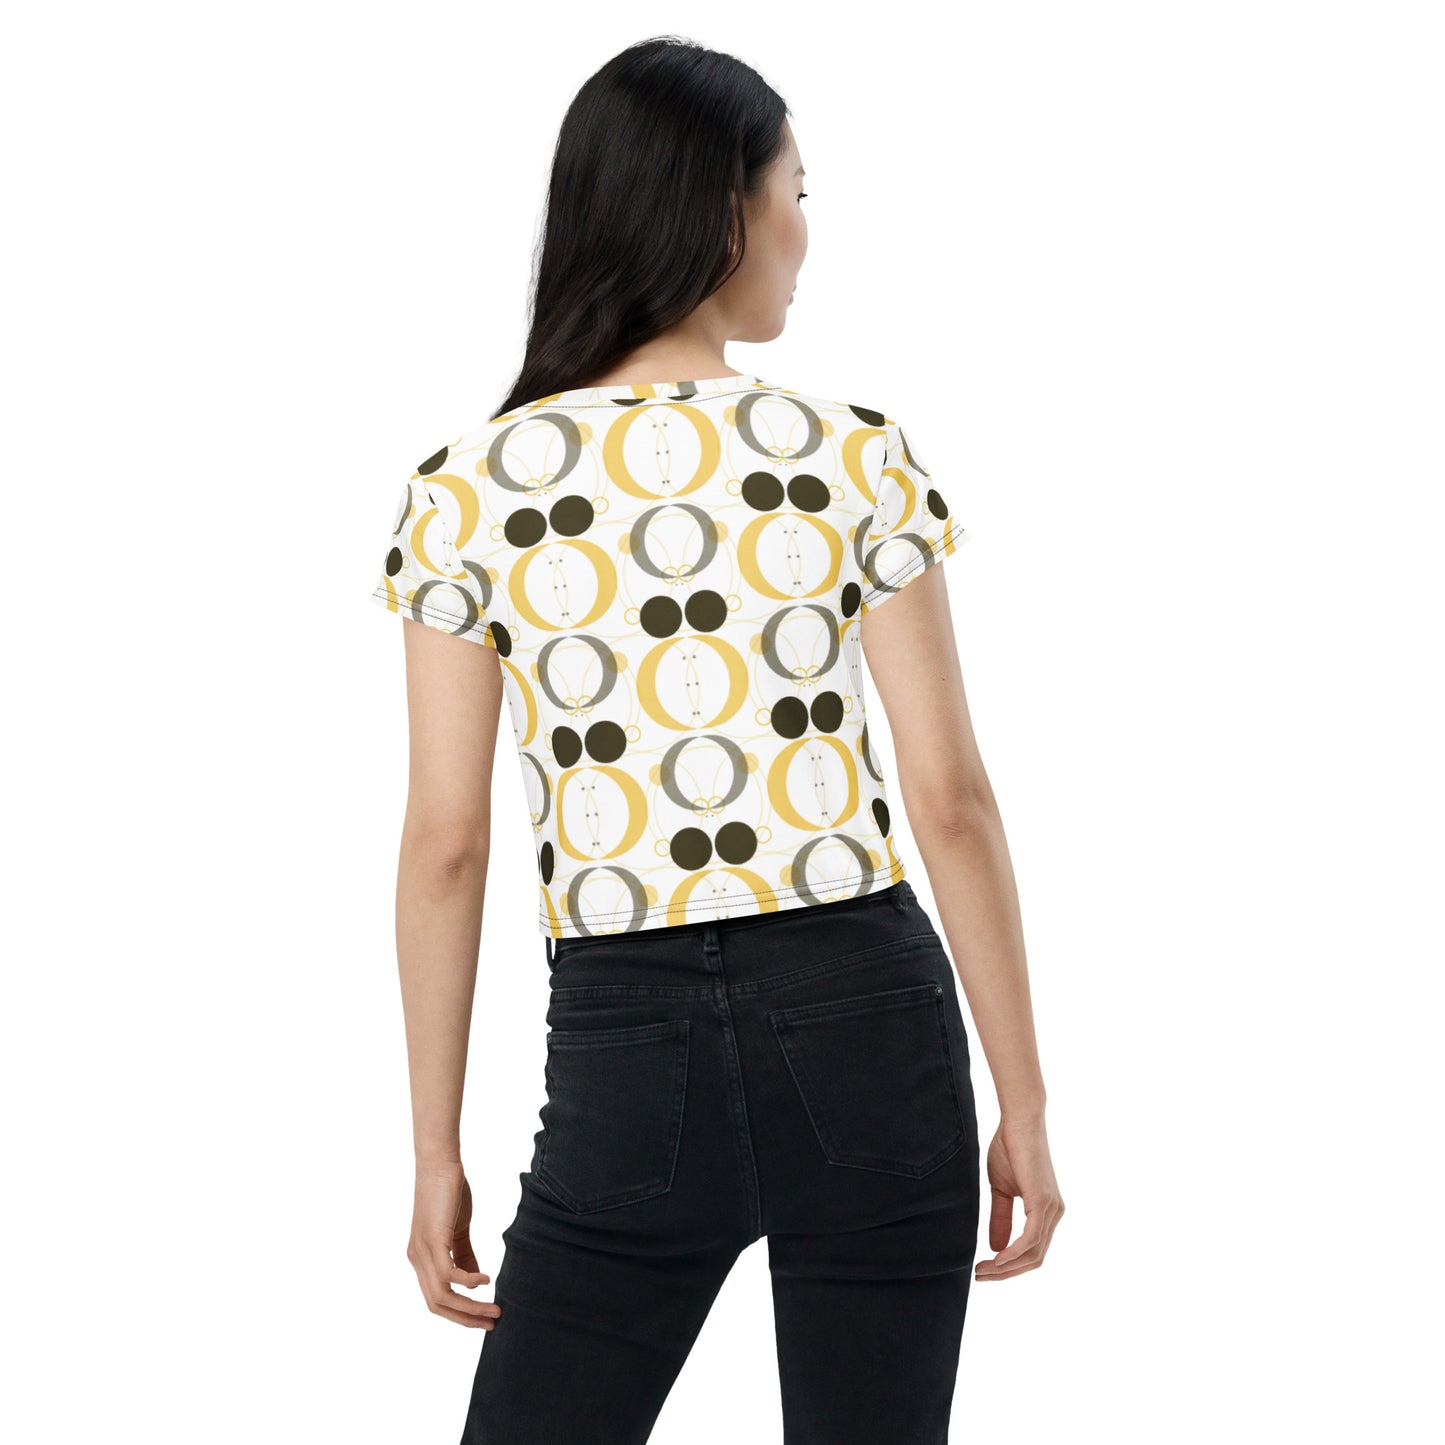 Its the 50s All-Over Print Crop Tee